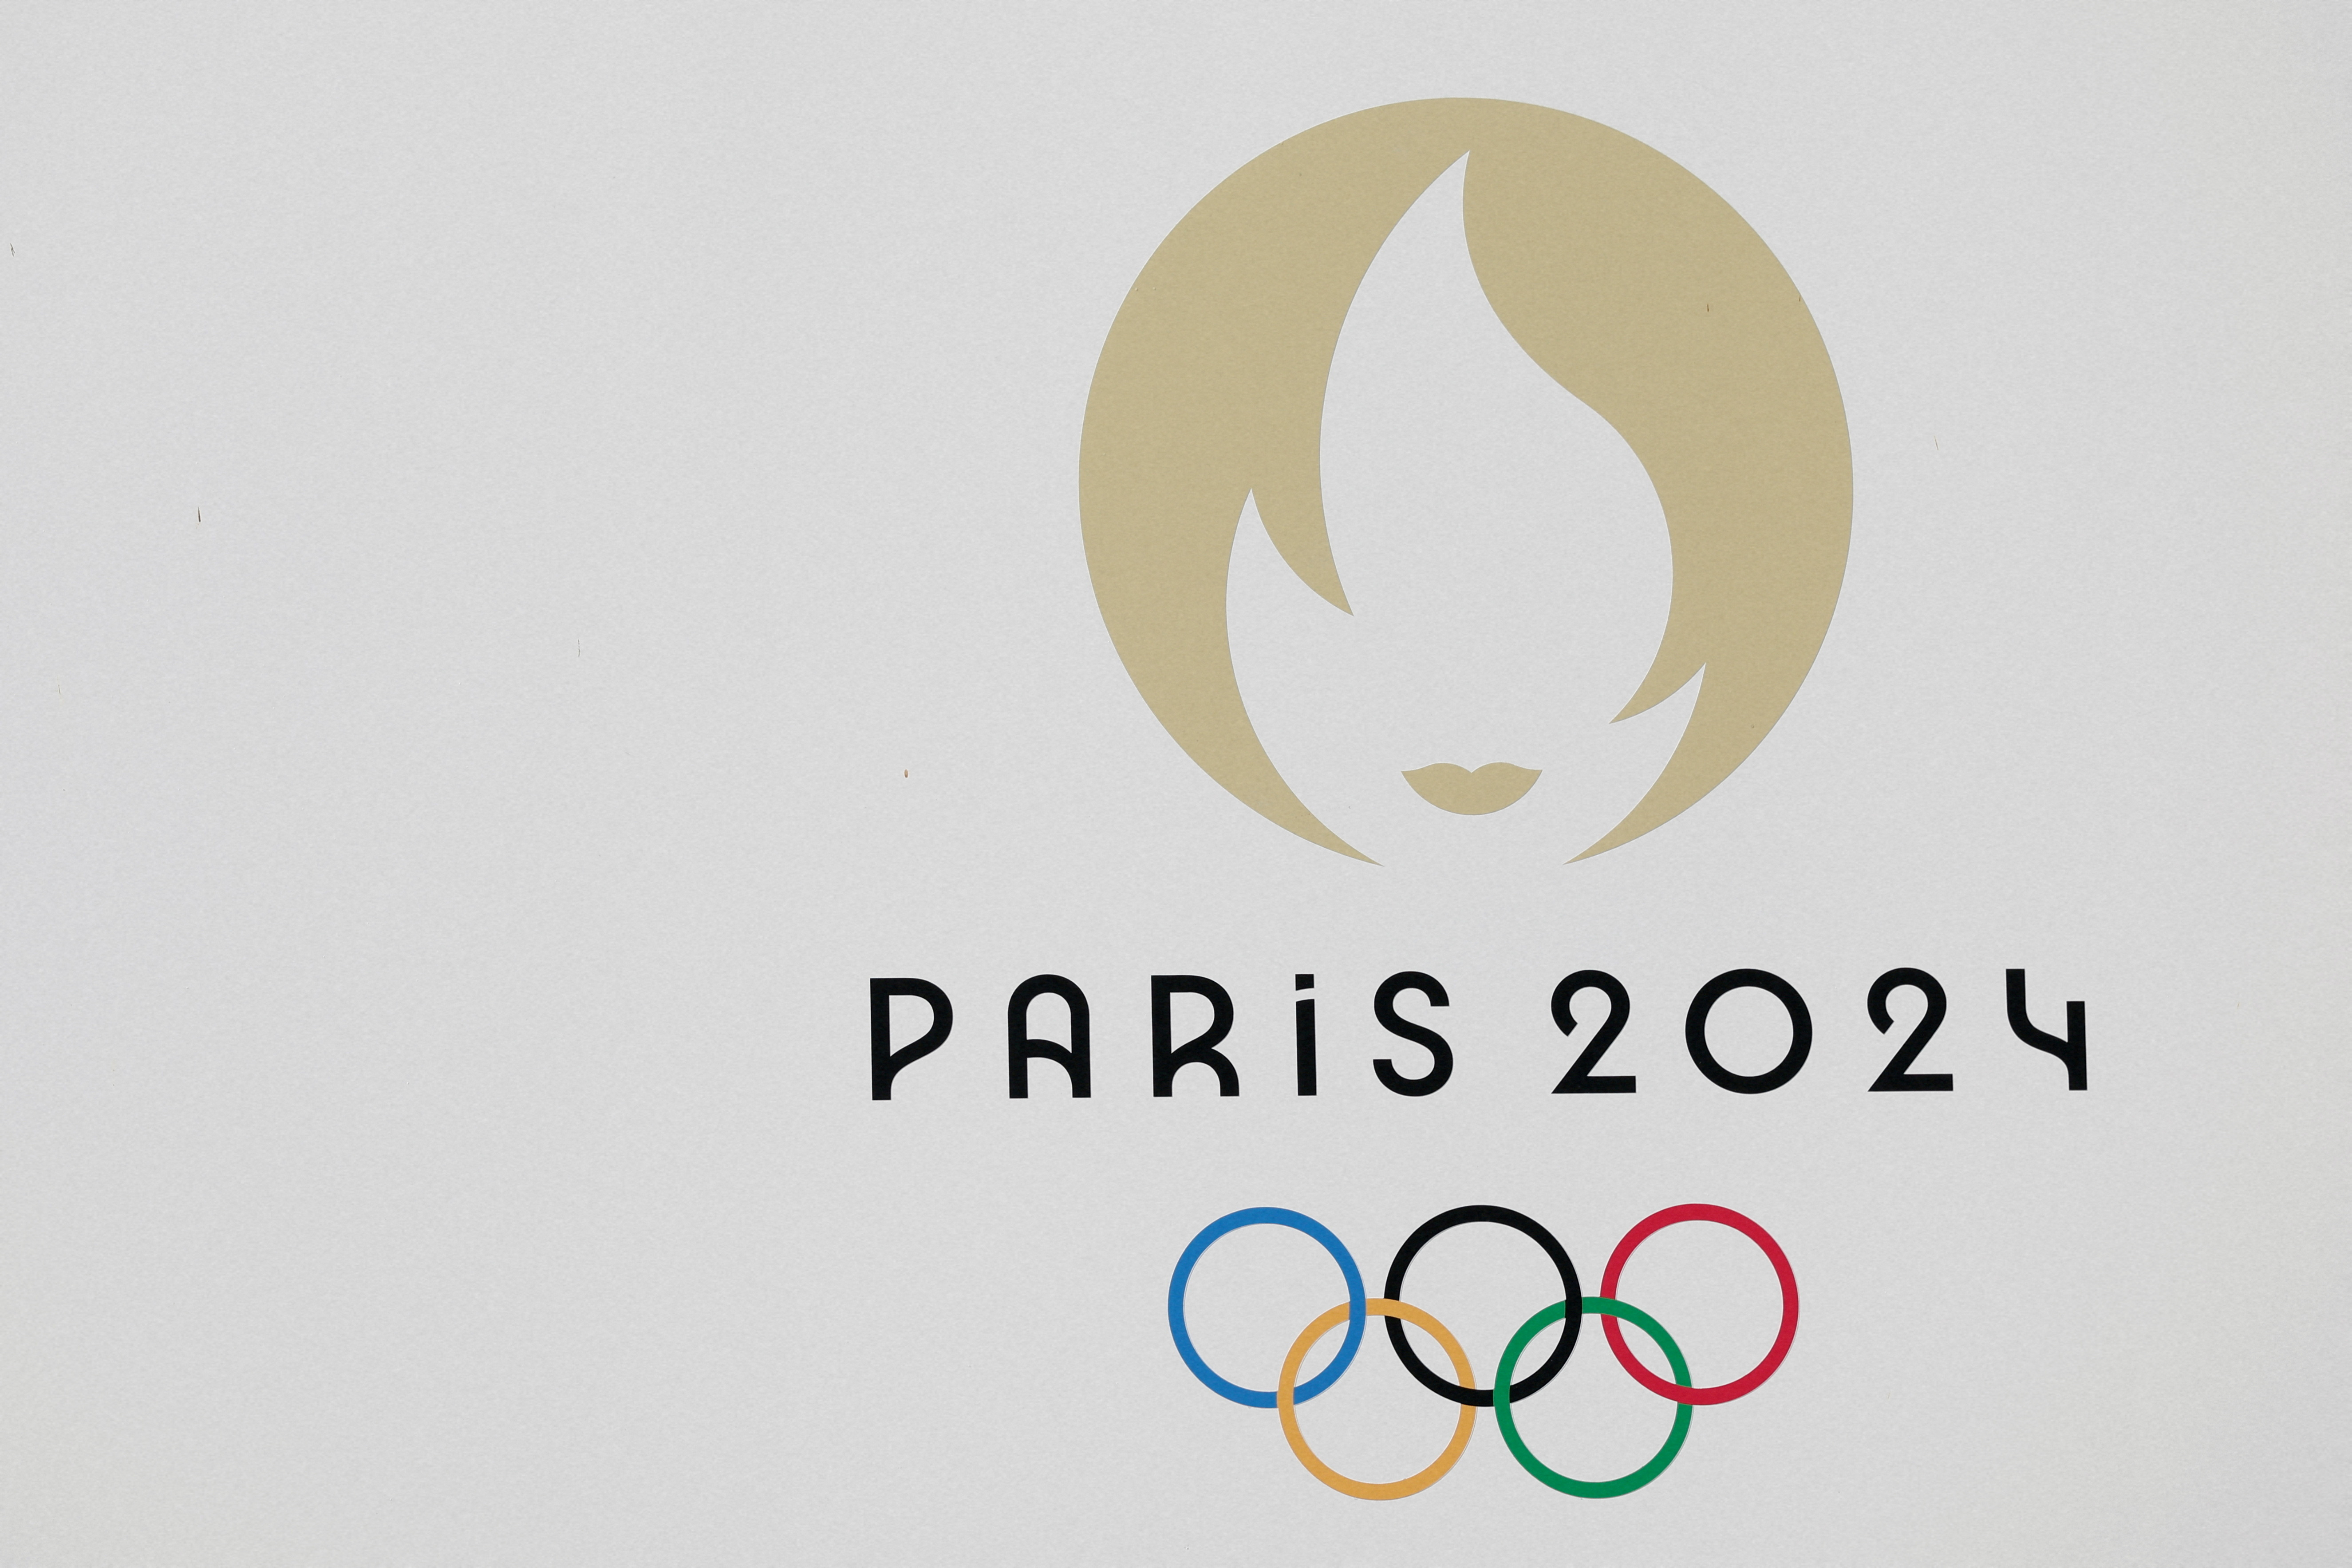 A view shows the logo of the Paris 2024 Olympic and Paralympic Games, in Paris